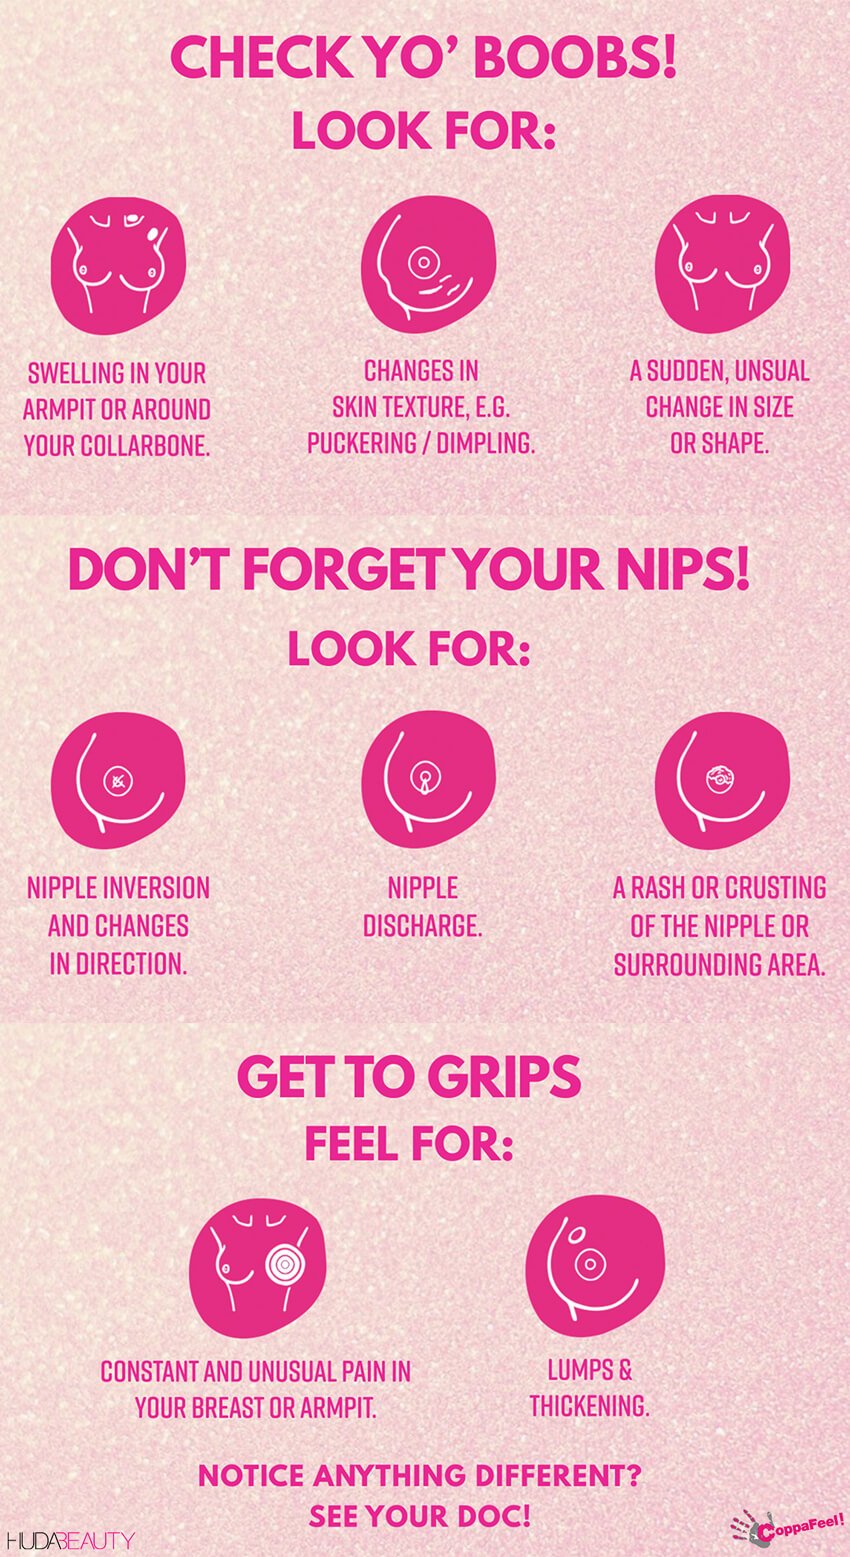 How to Check your Boobs for Lumps